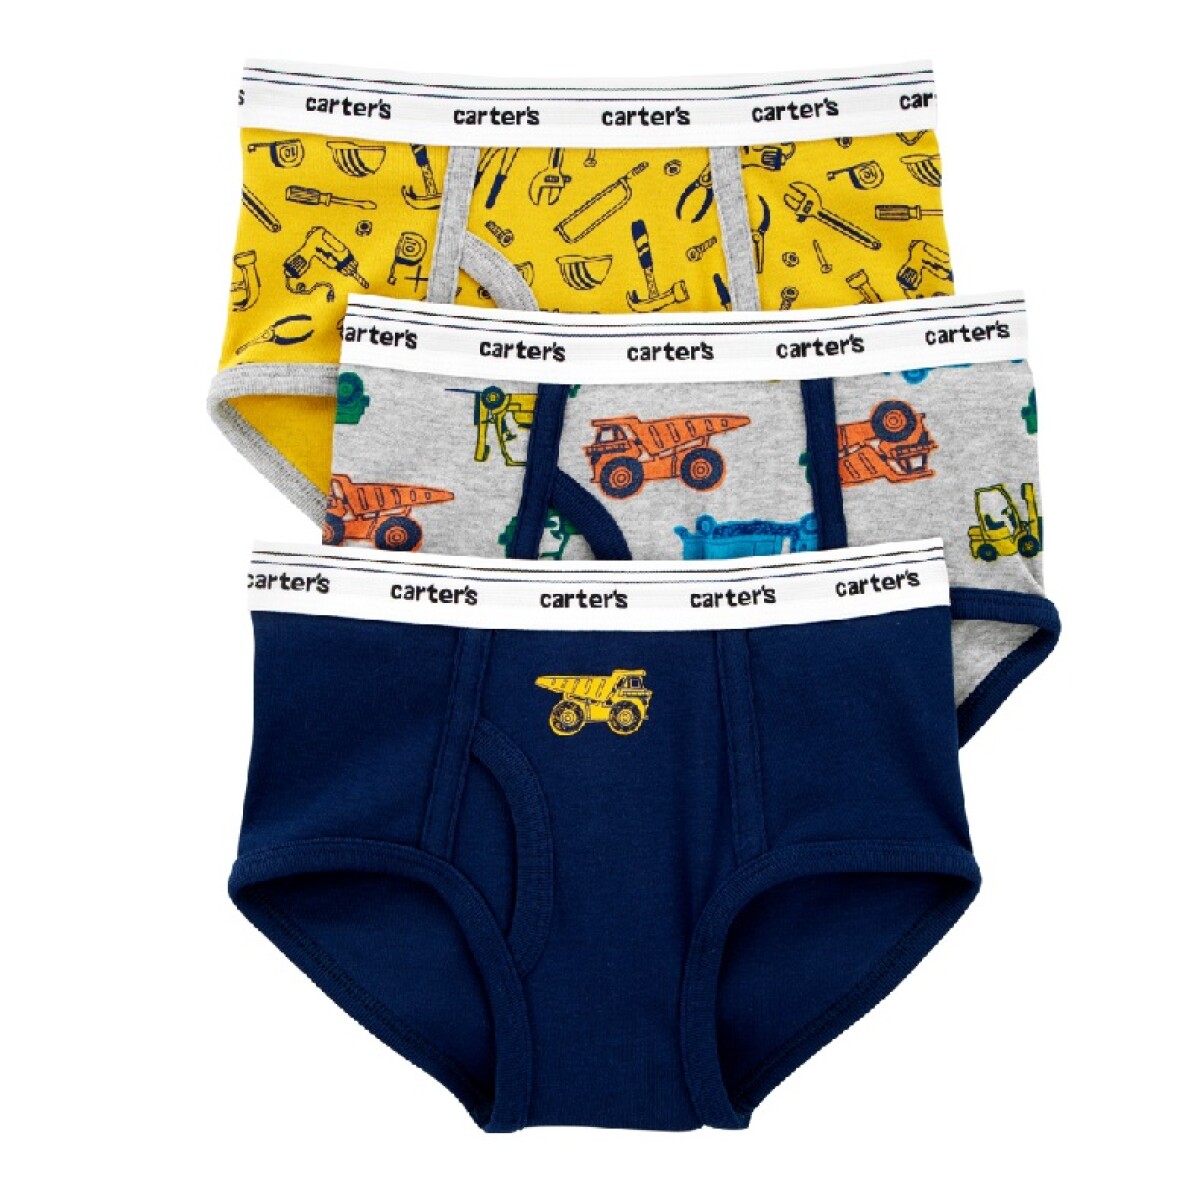 Pack X 3 Calzoncillos Carters Tractores 3J281910 - GRIS-AMARILLO-AZUL 